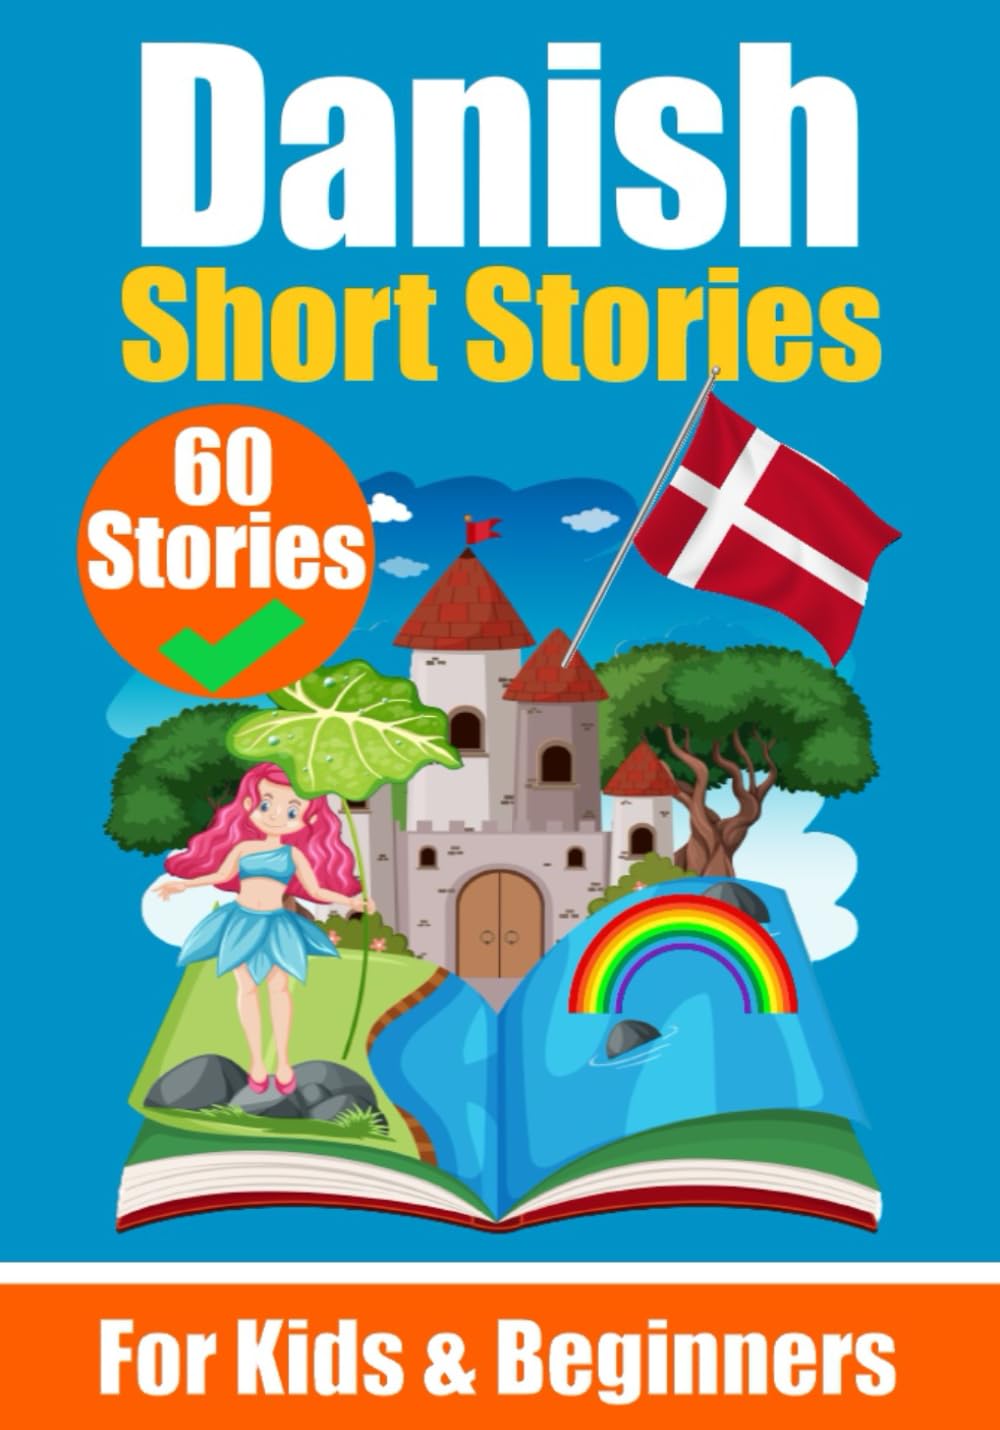 60 Short Stories in Danish | A Danish Learning Book for Children and Beginners